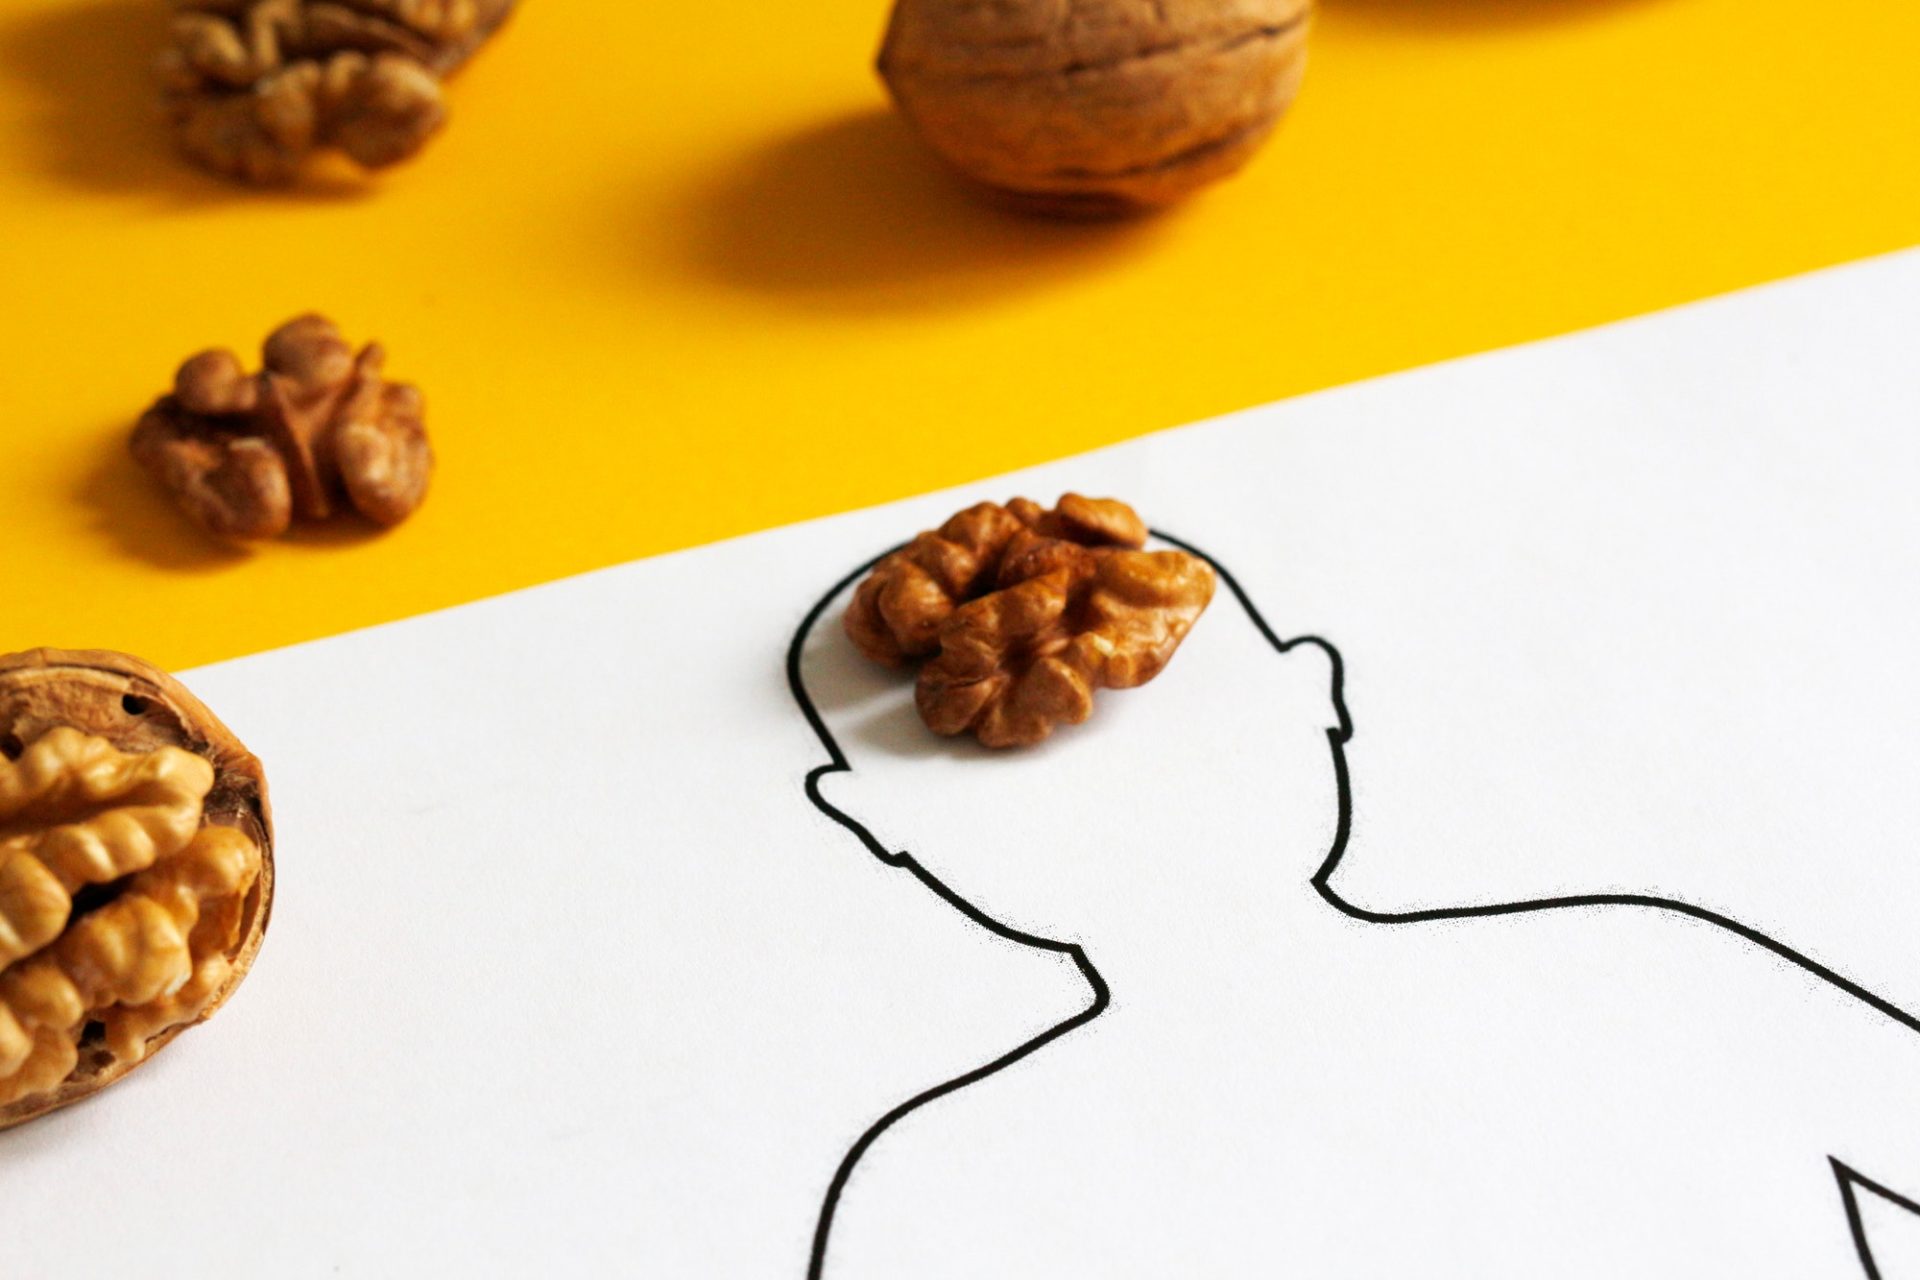 Anatomical concept of the brain in the form of a walnut.